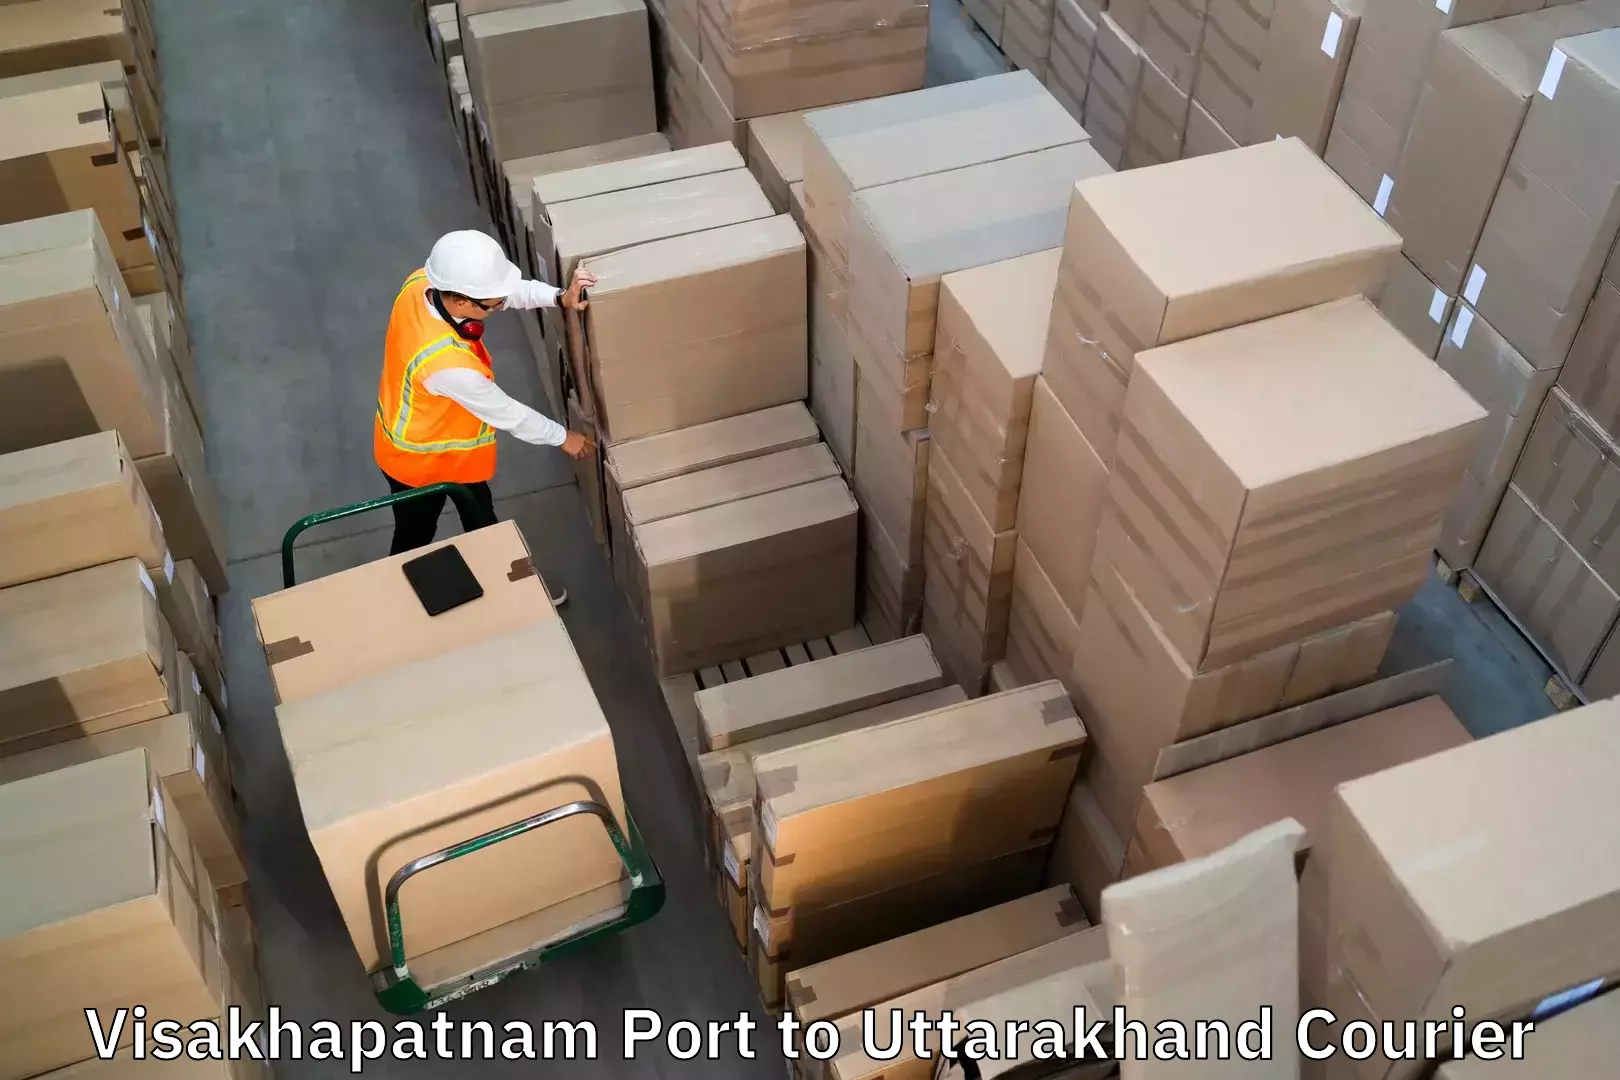 Luggage shipping specialists Visakhapatnam Port to Champawat